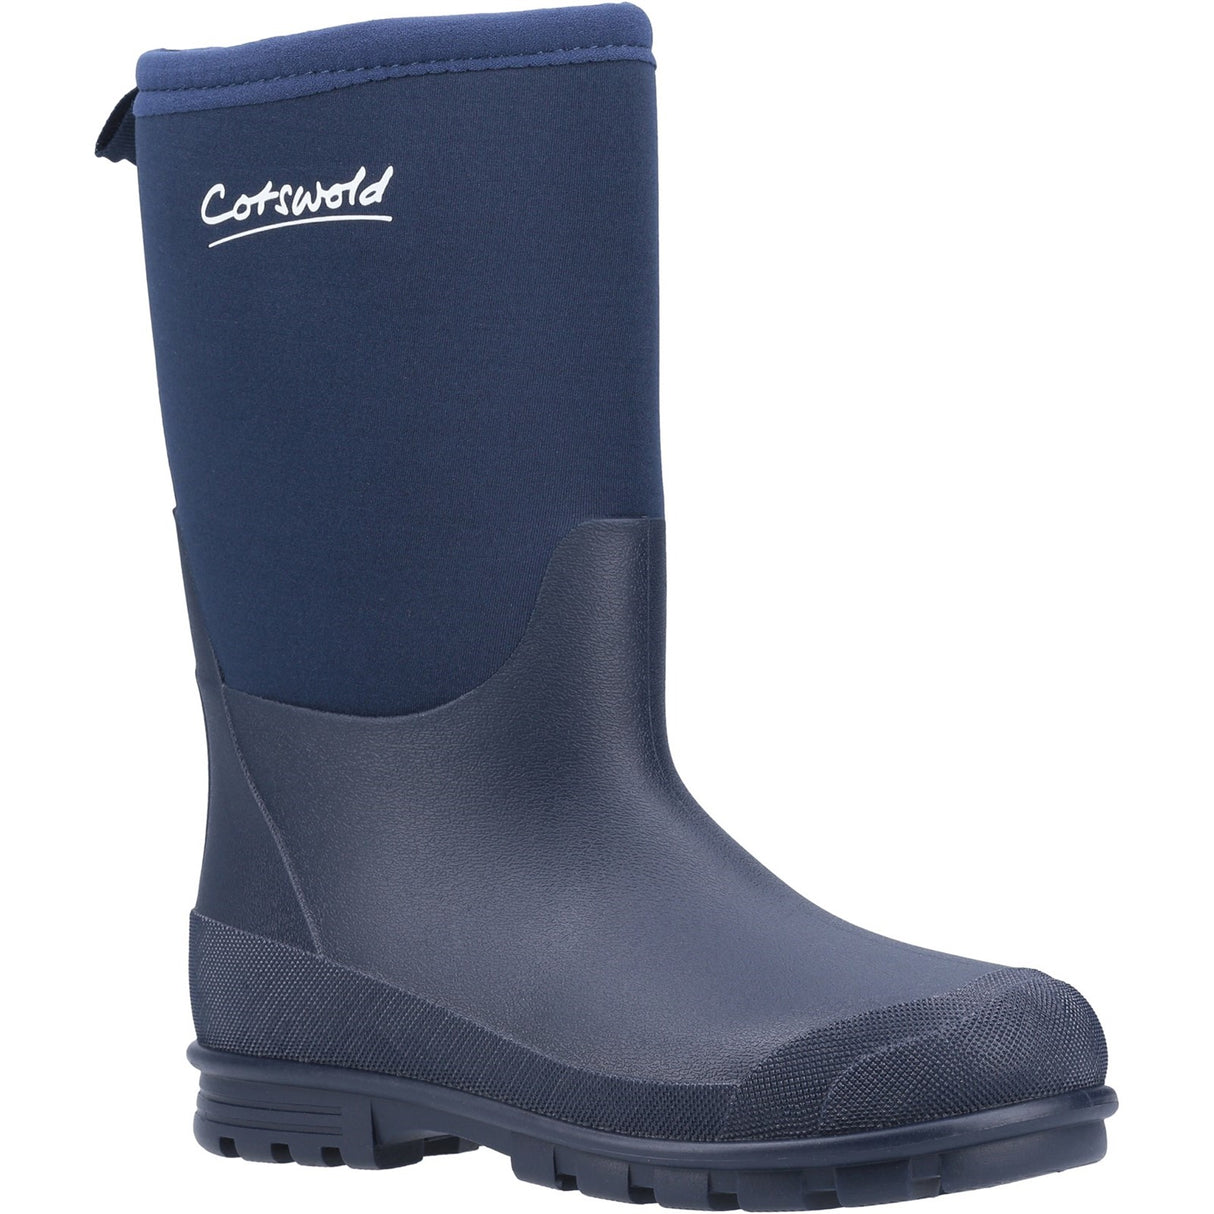 Cotswold Hilly Neoprene Wellington Boots